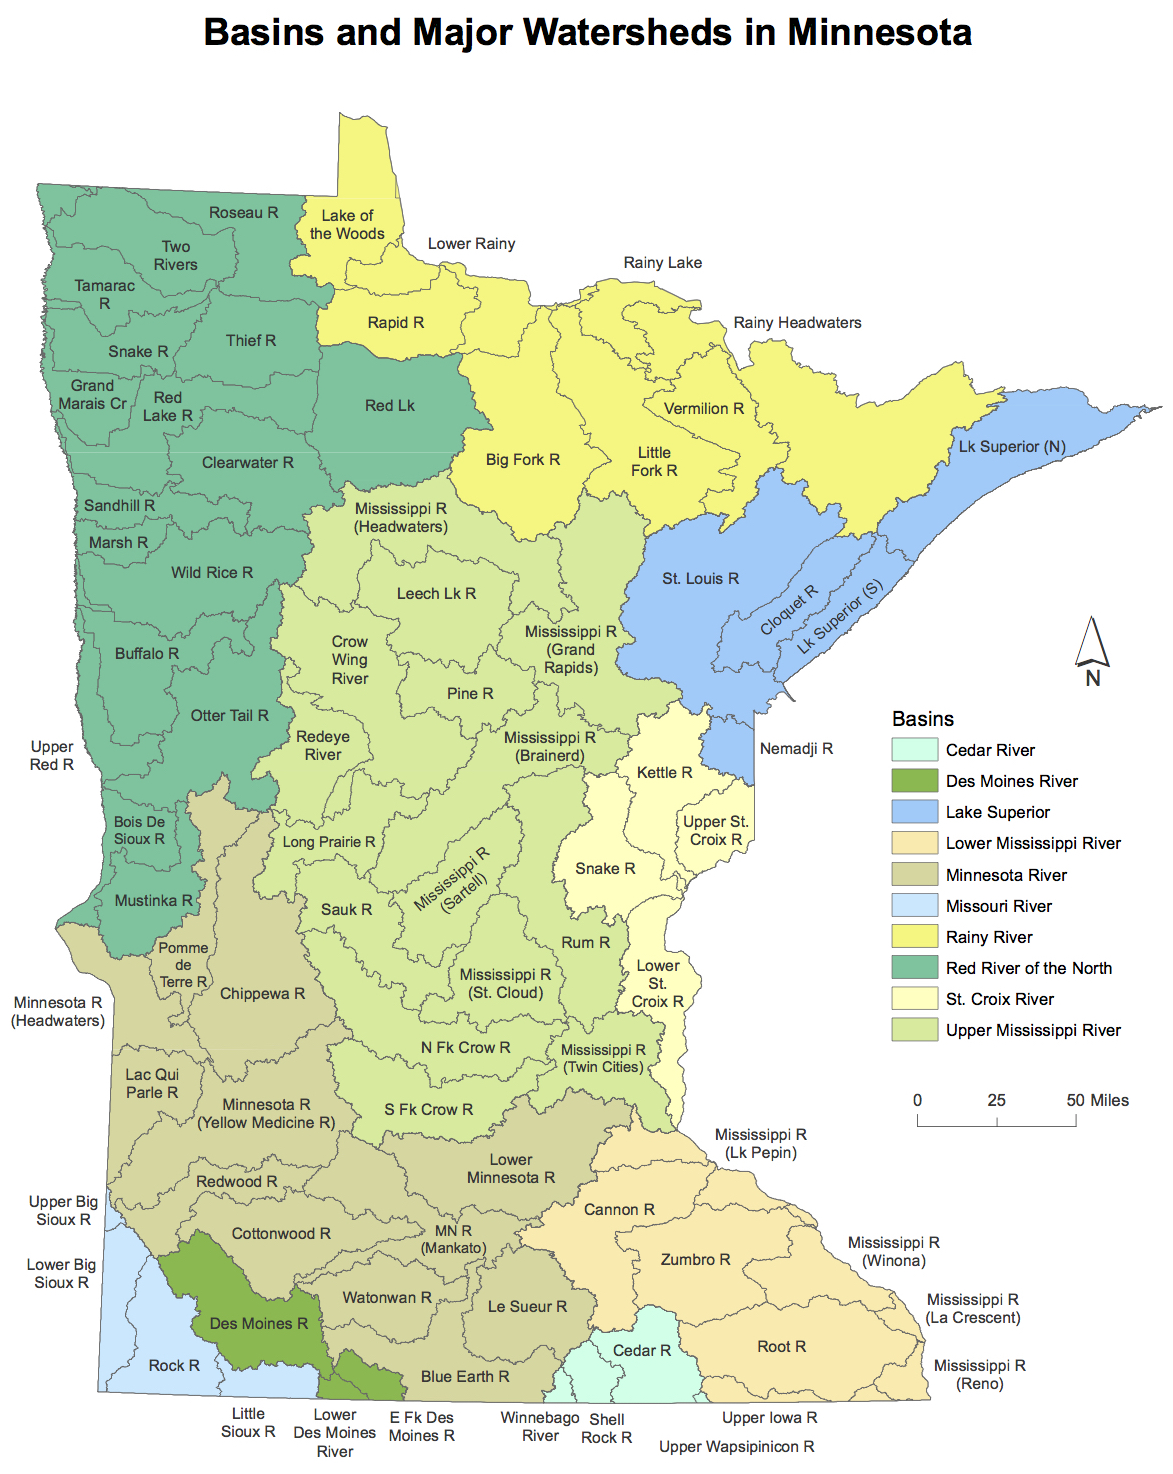 Minnesota's Watersheds (click to enlarge)